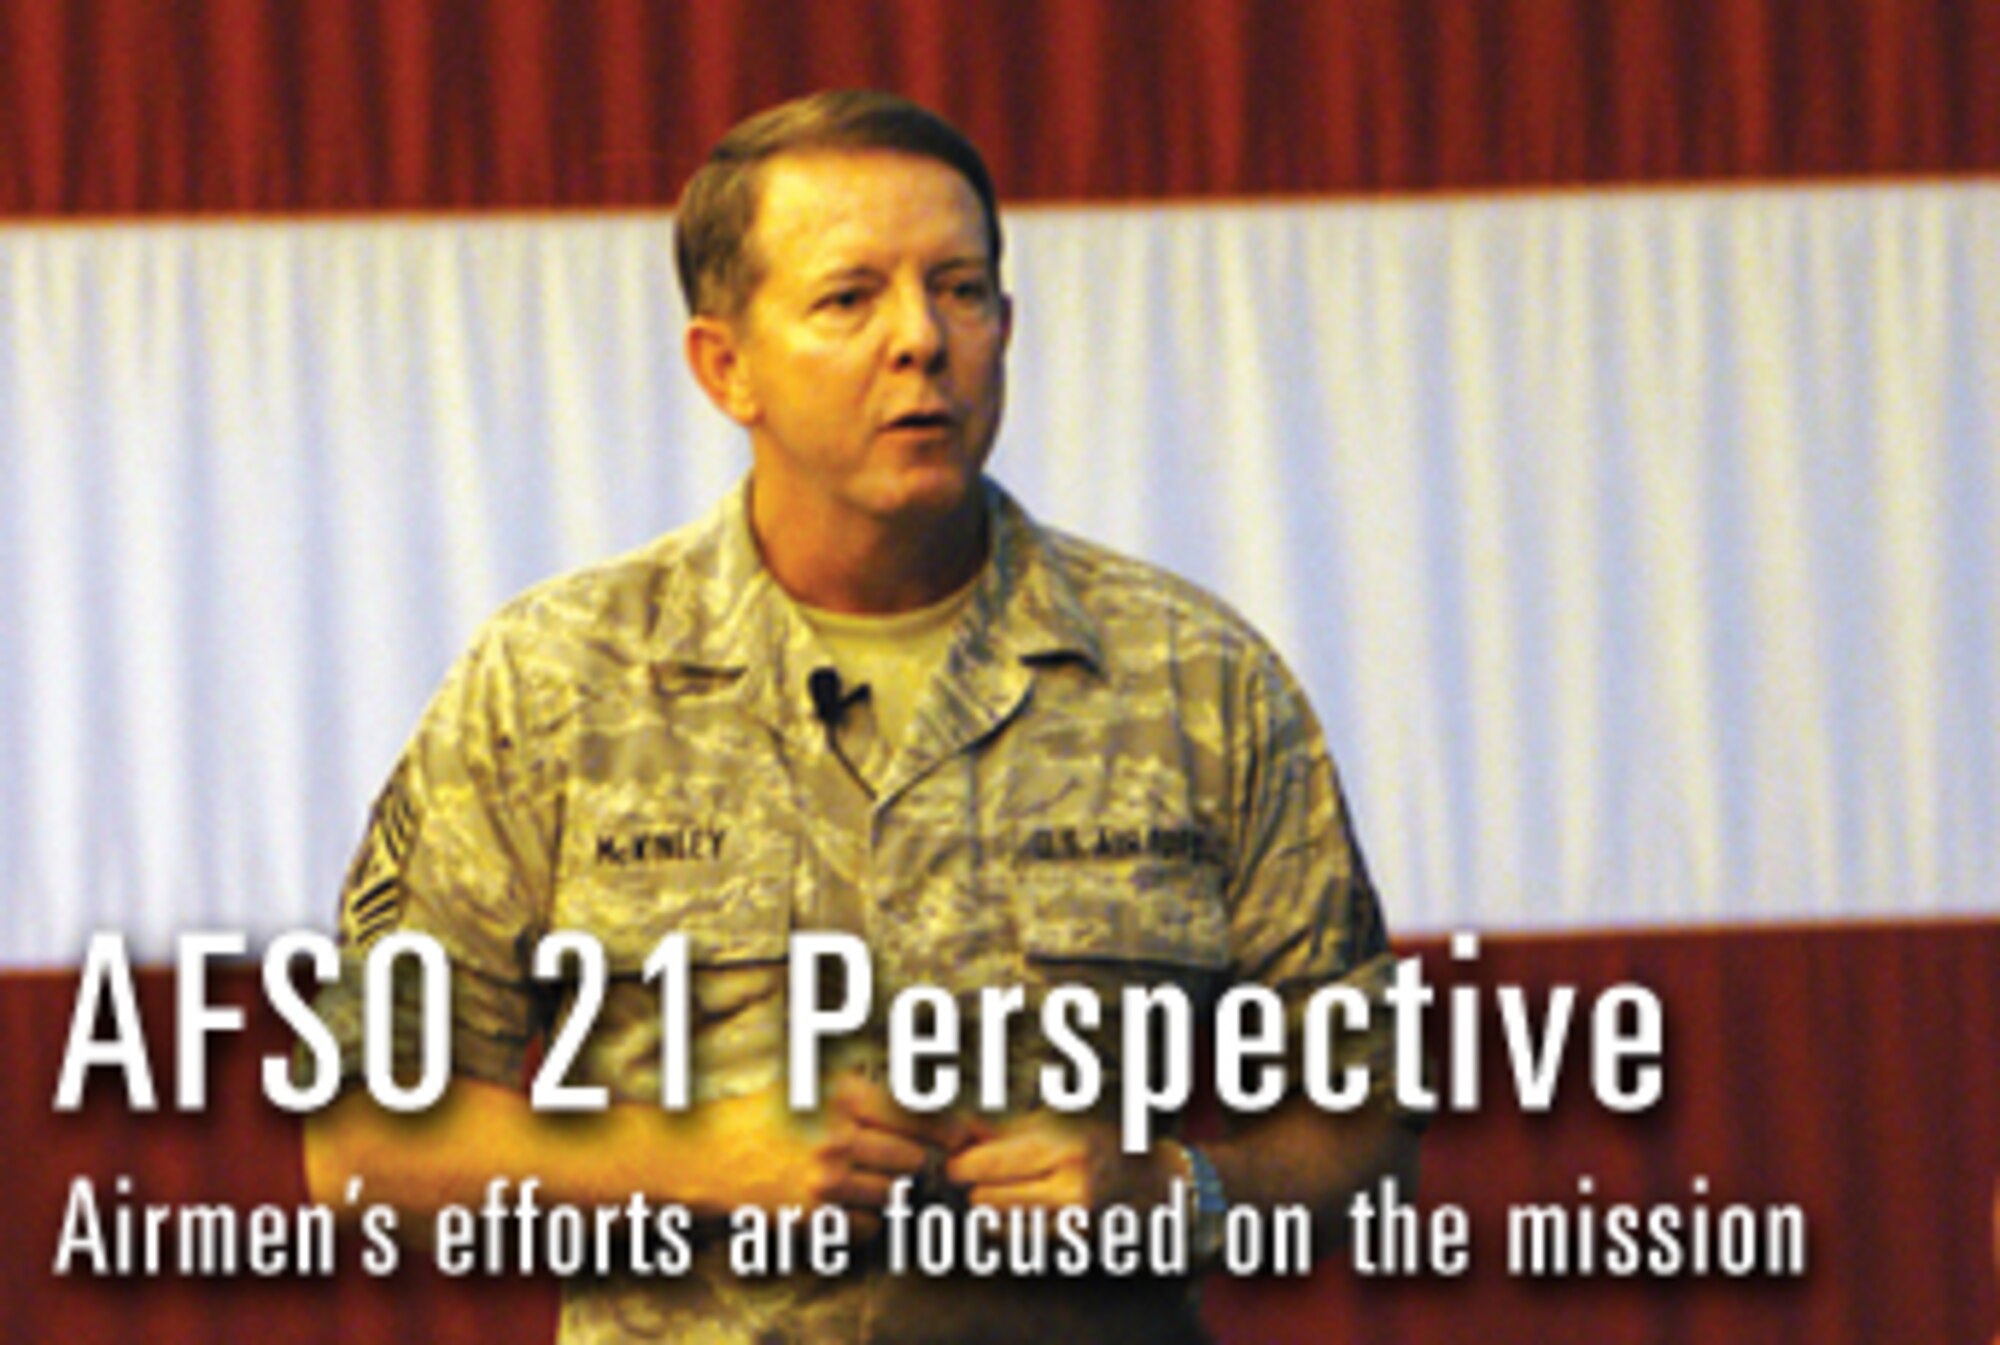 Chief McKinley offers AFSO 21 perspective